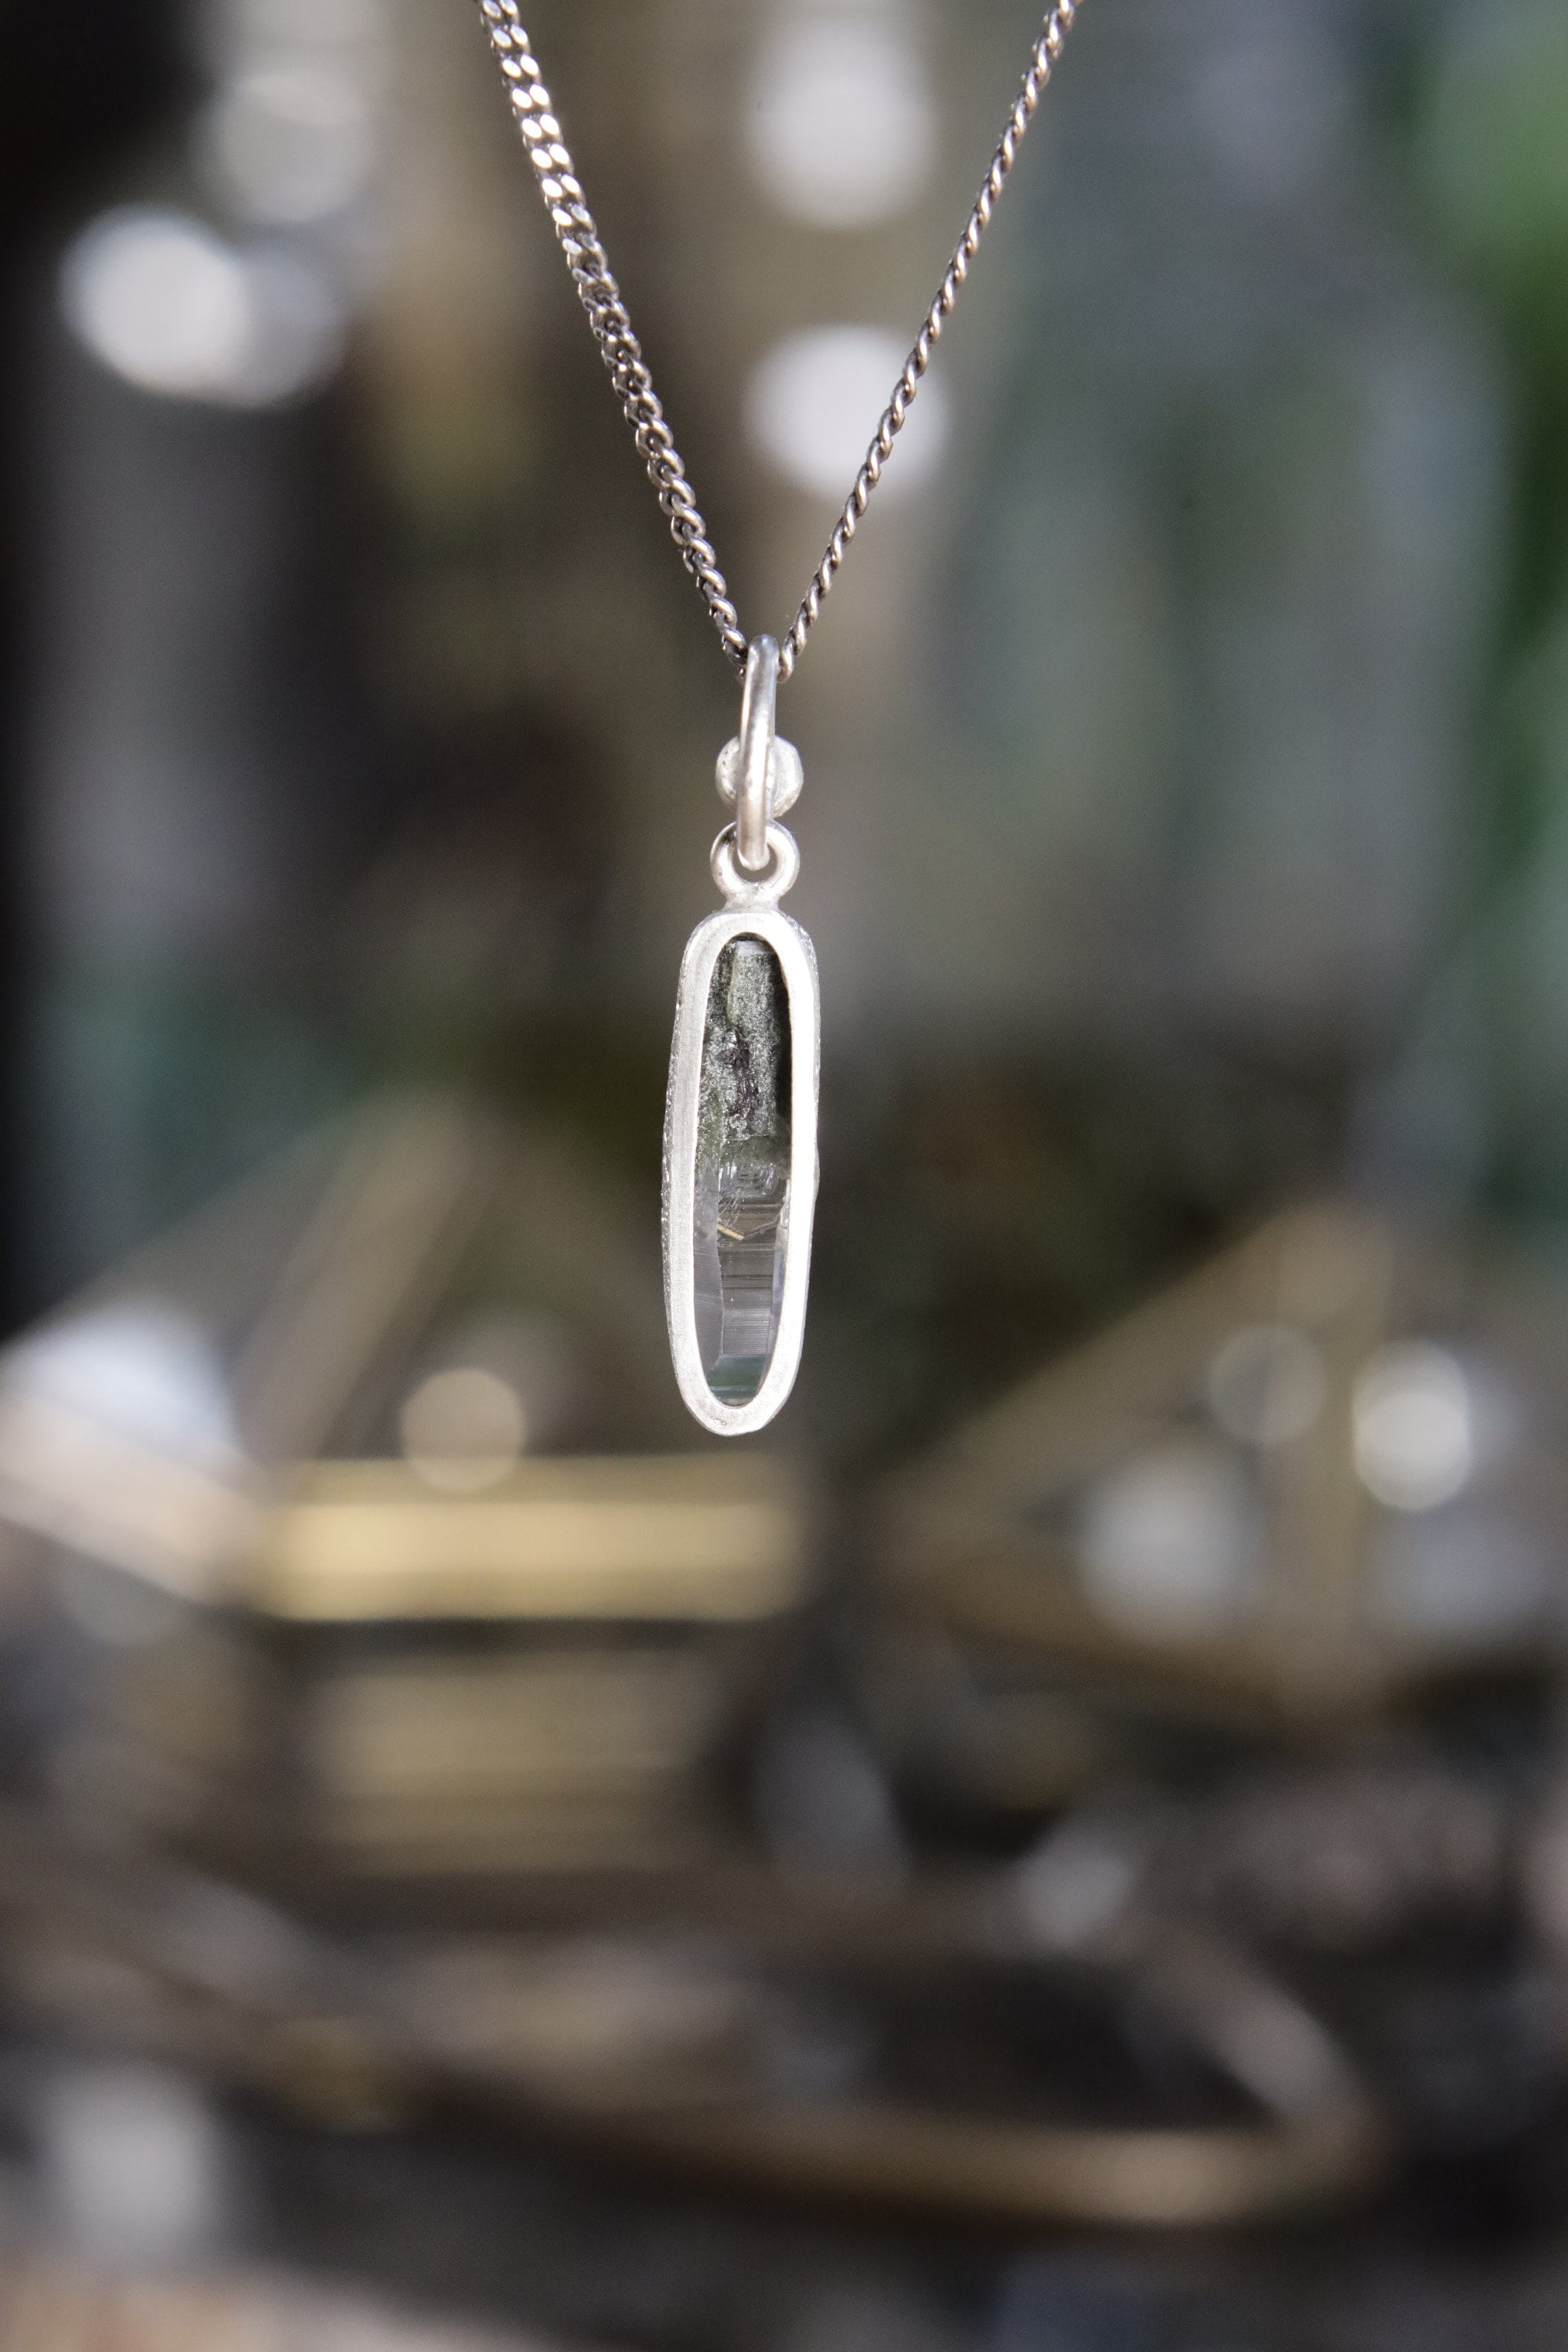 Luminous Peak: Sterling Silver Pendant with Himalayan Chlorite Quartz and Opal - High Shine & Sand Textured - NO/07